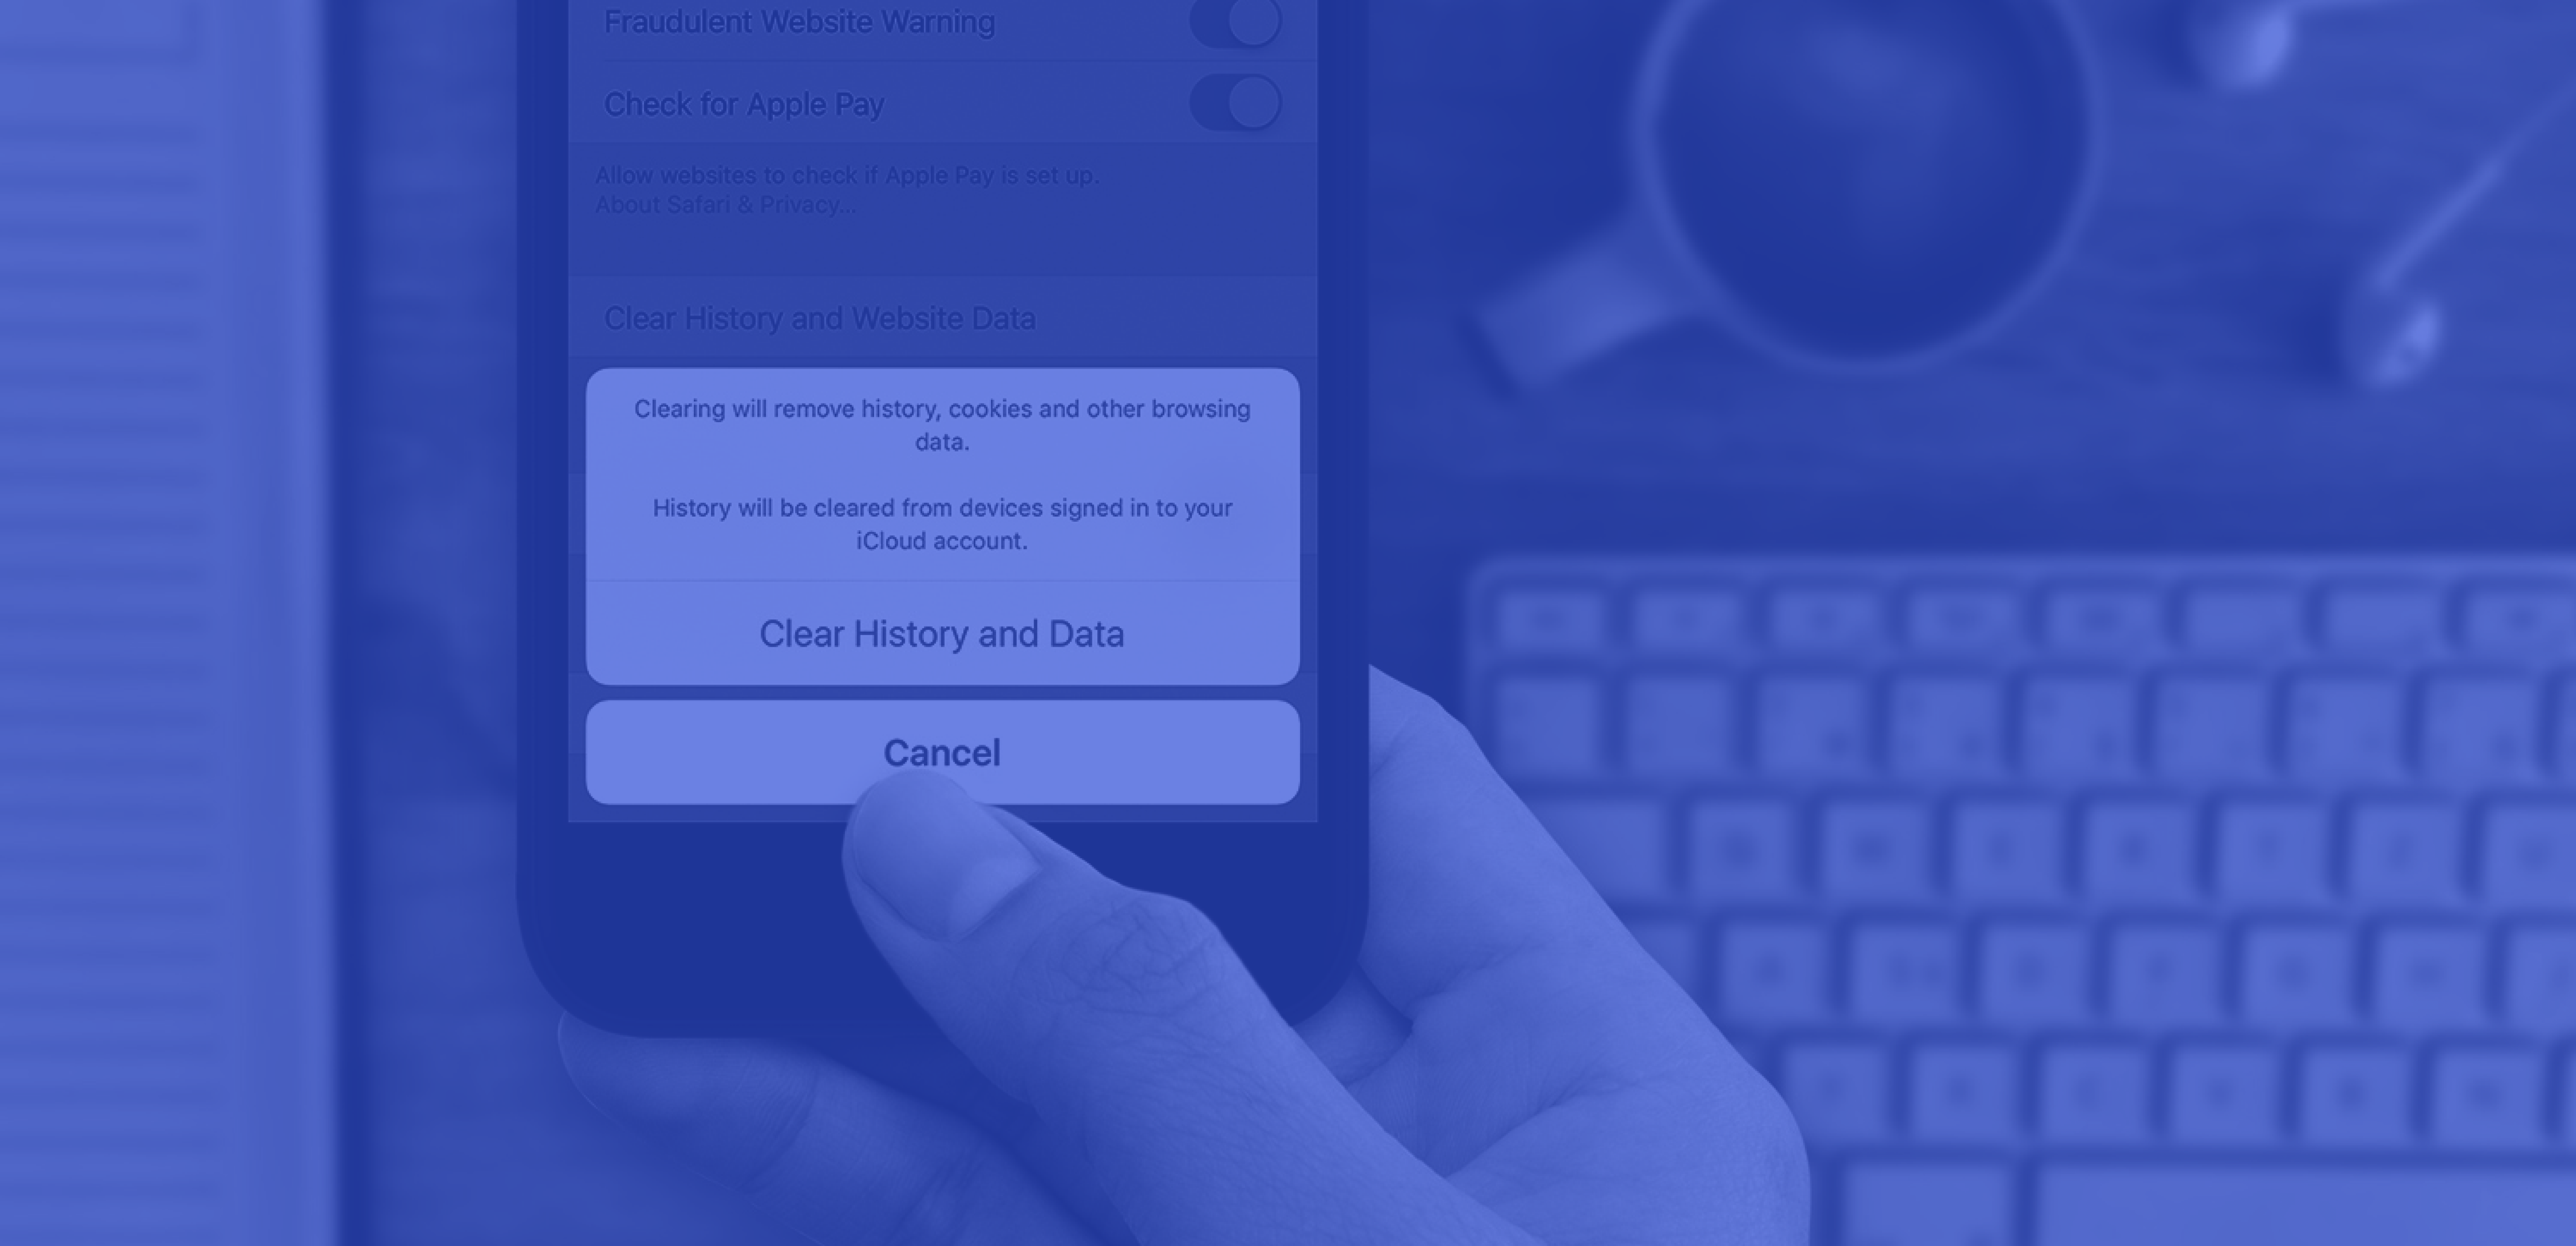 Phone screen popup: Clearing will remove history, cookies and other browsing data. Clear History and Data